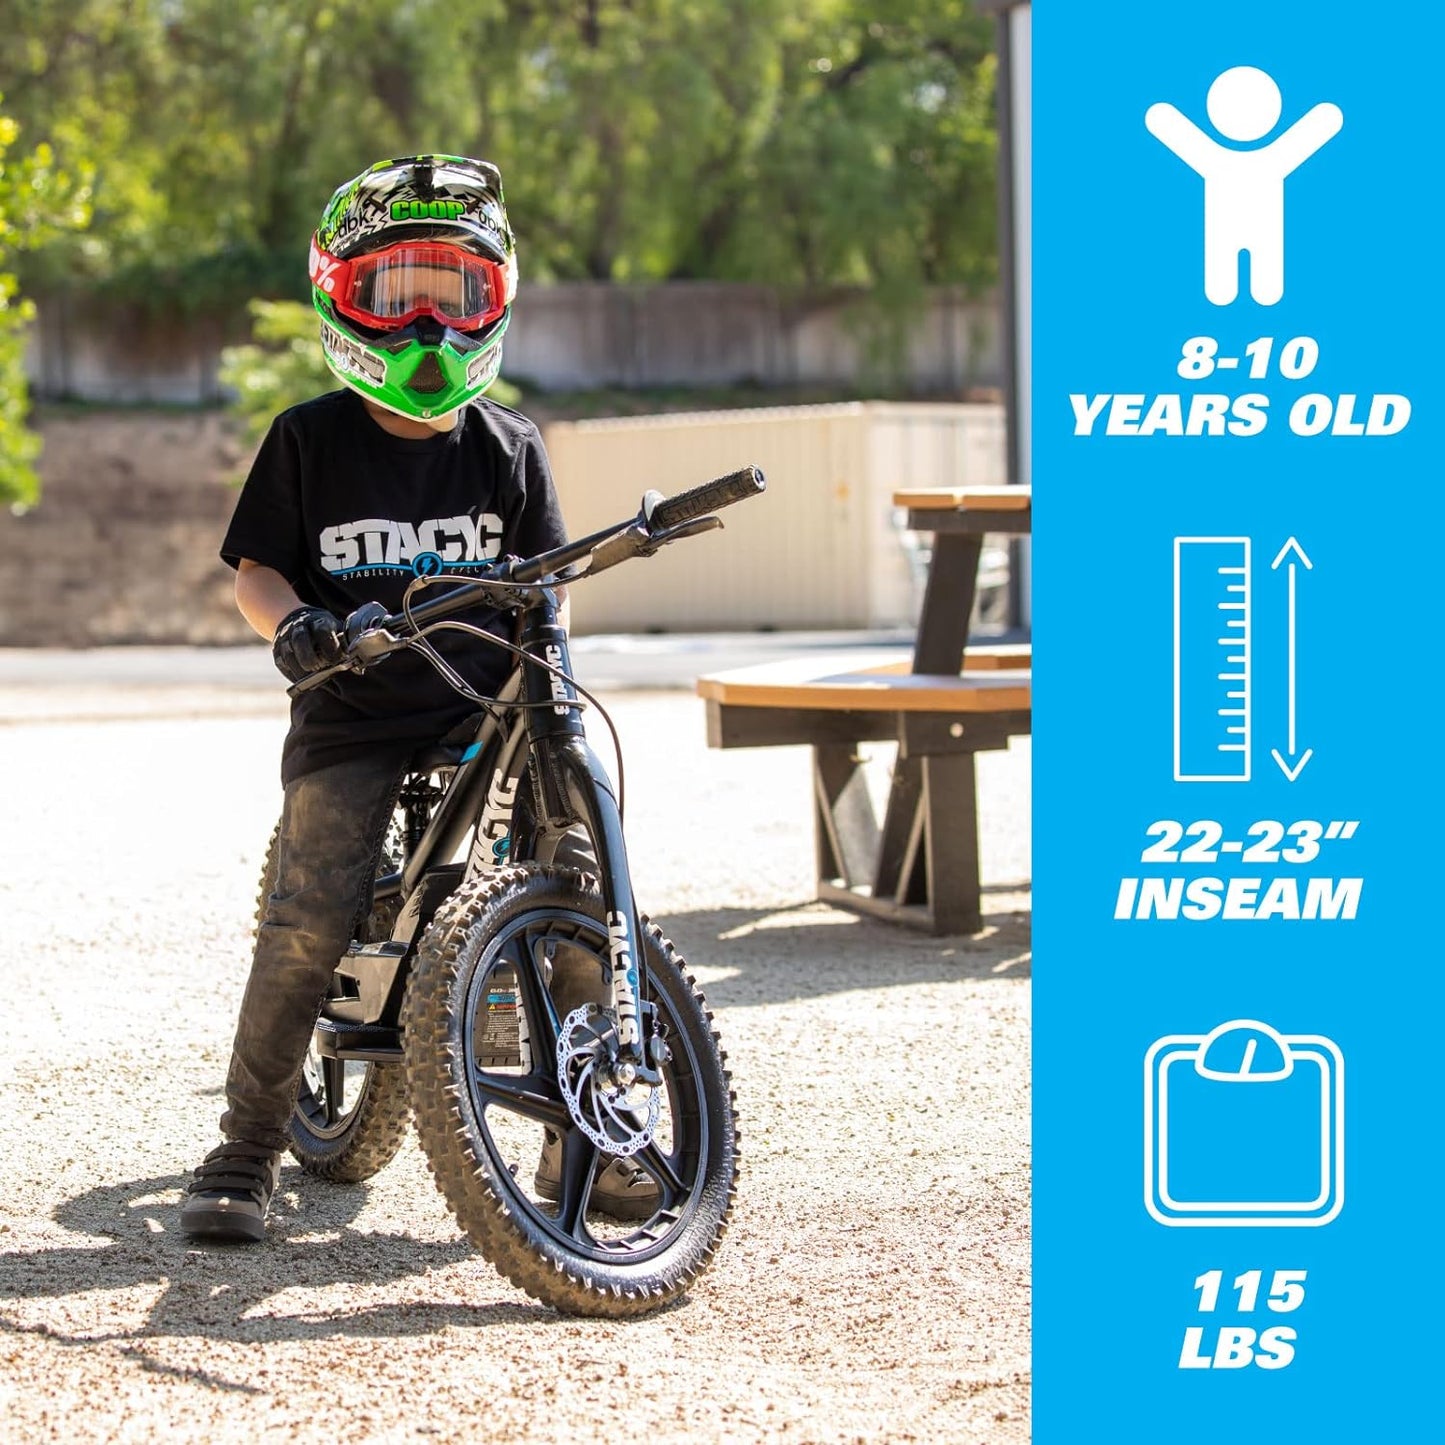 STACYC Brushless 18eDRIVE Electric Balance Bike for Kids Ages 8-10 Years Old